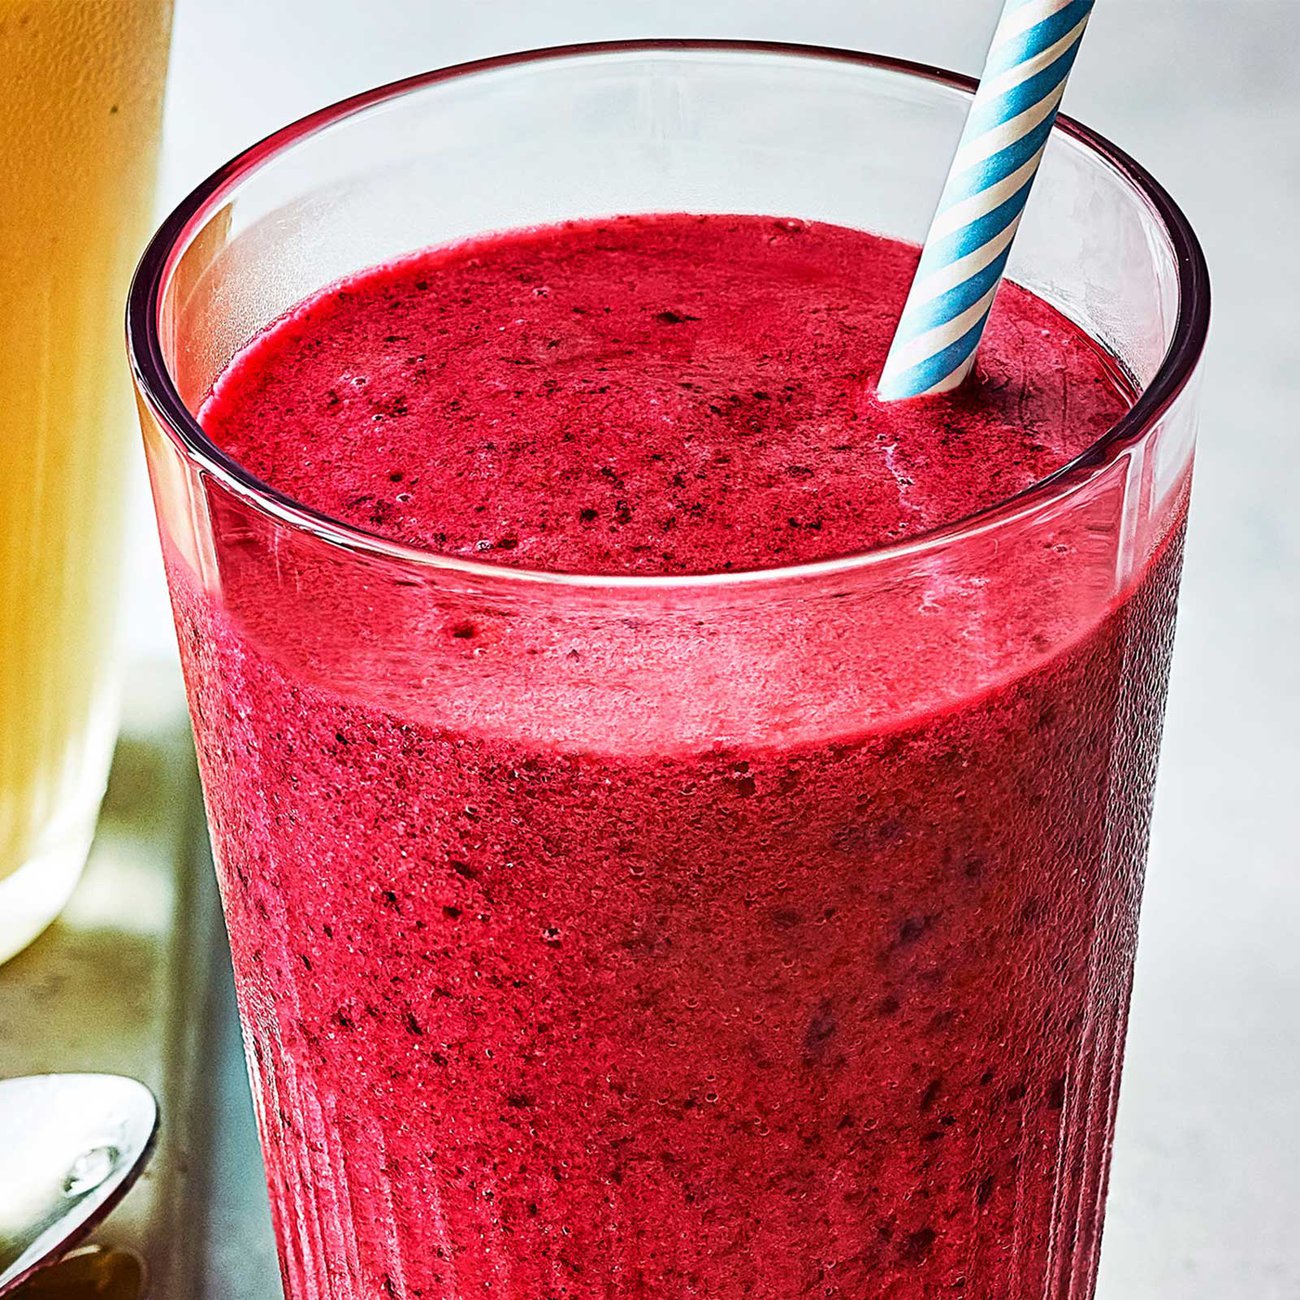 Make a smoothie with kefir to boost your probiotic intake